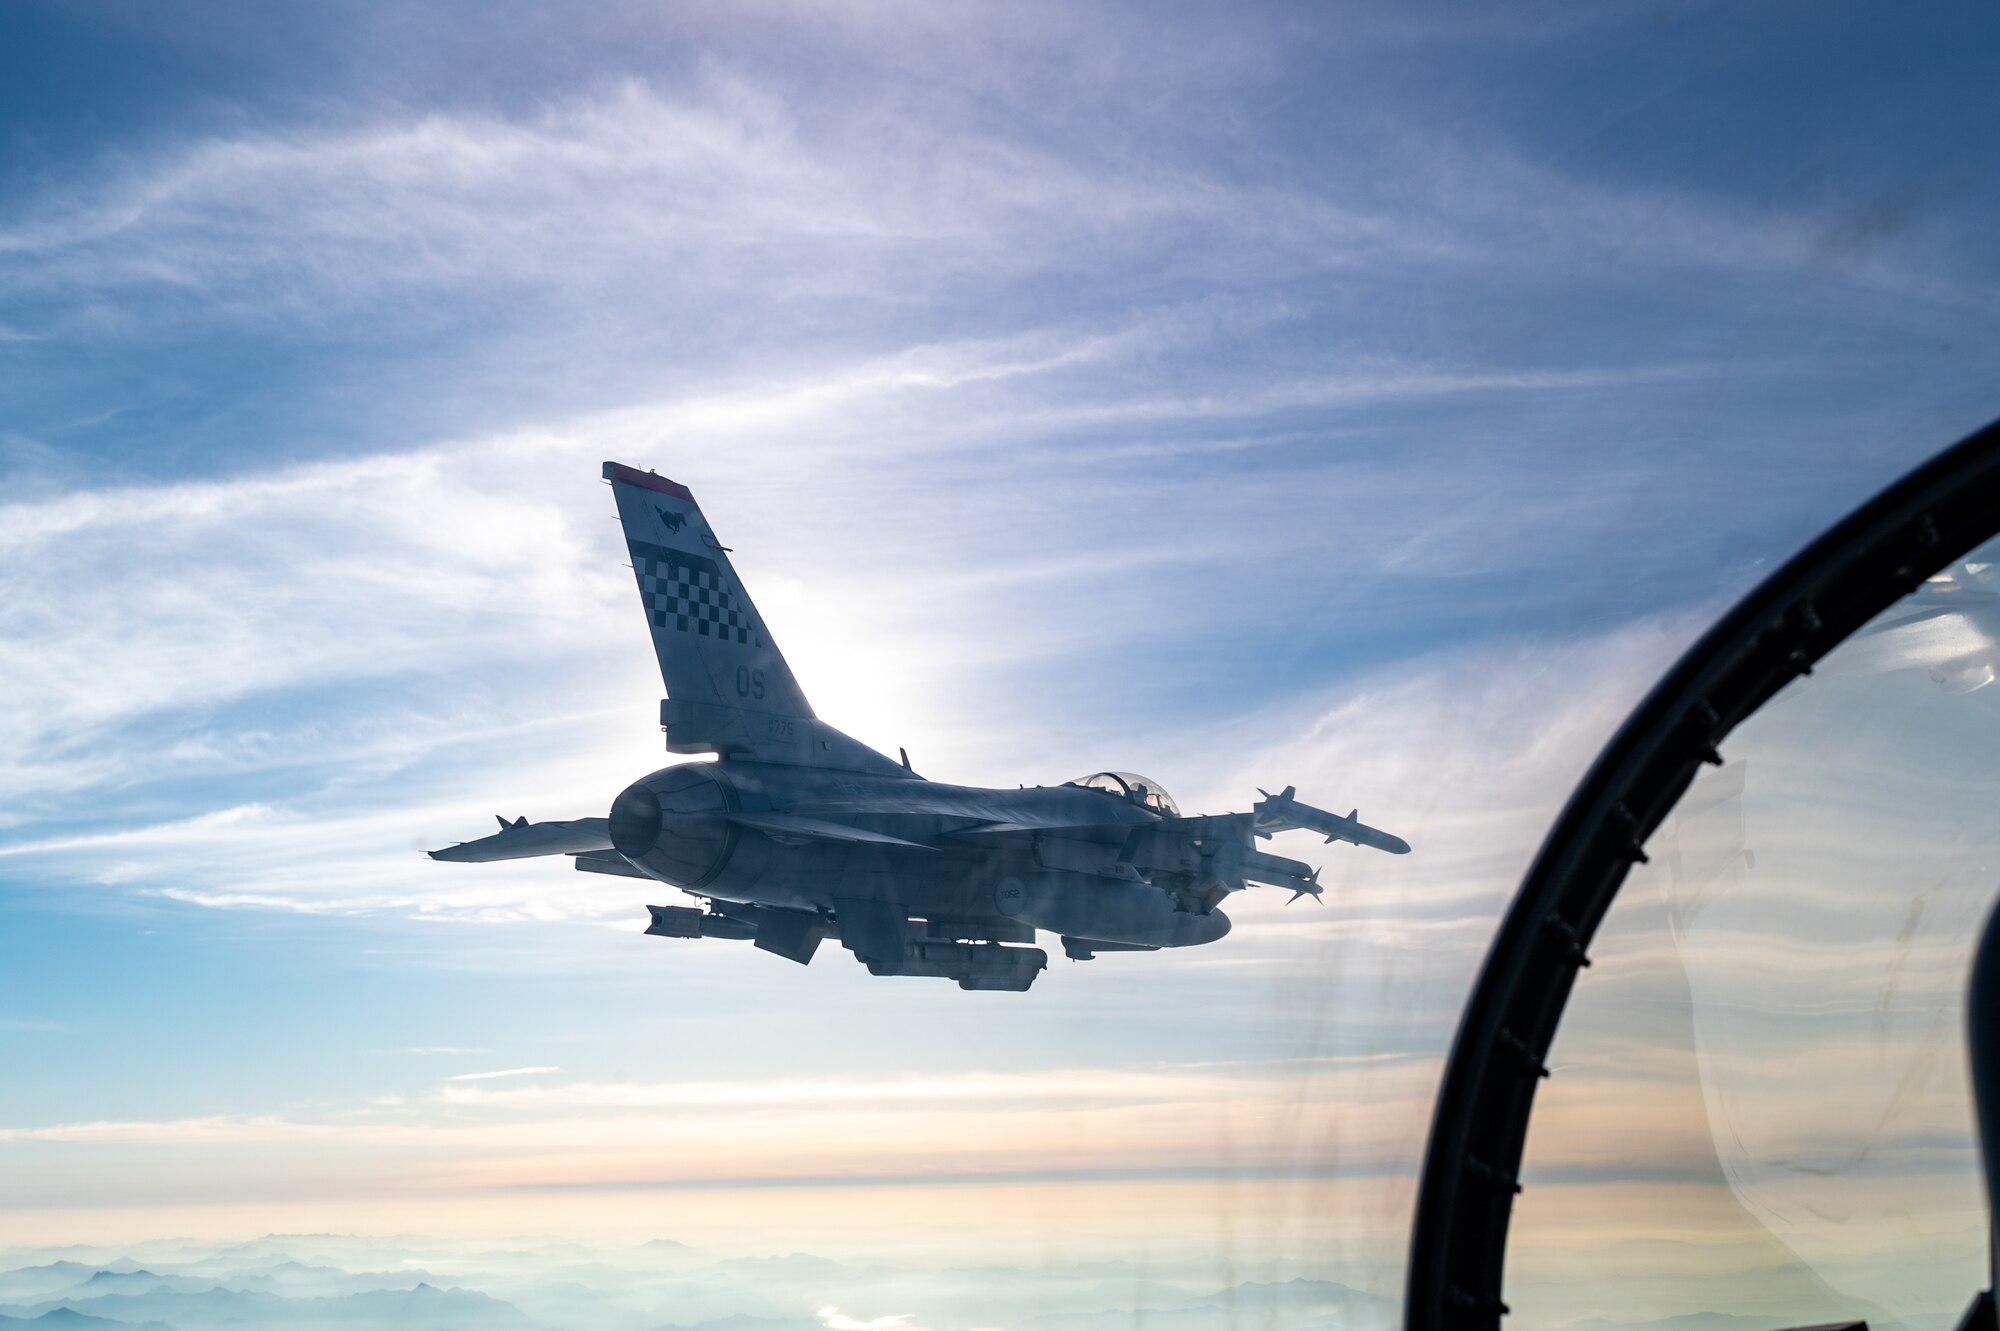 A U.S. Air Force F-16 Fighting Falcon assigned to the 36th Fighter Squadron participates in close air support (CAS) training over Gyeonggi-do, Republic of Korea, Dec. 20, 2022.